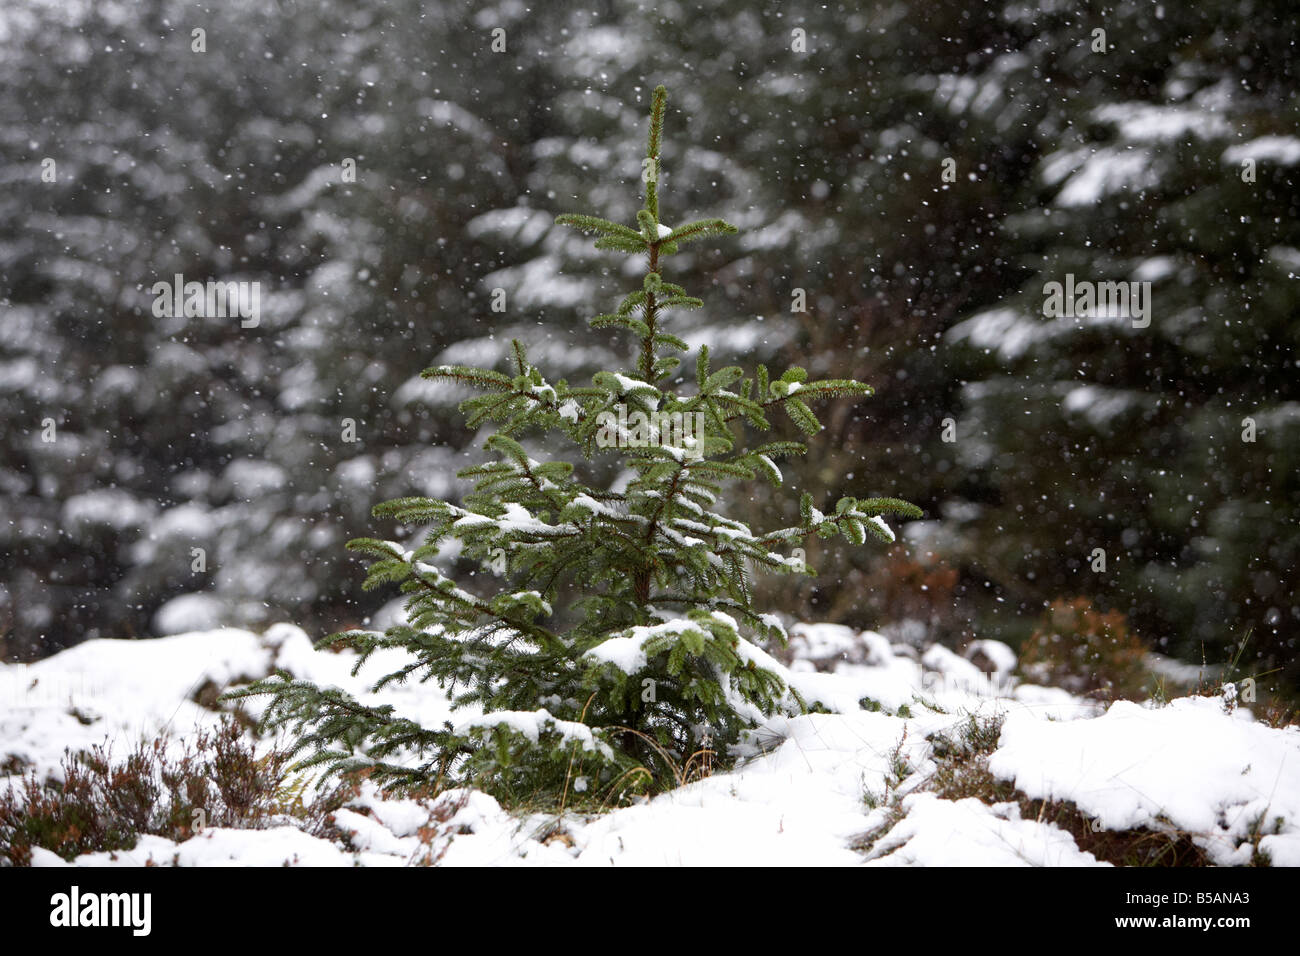 snow falling on young sapling evergreen conifer pine trees in a forest in county antrim northern ireland uk Stock Photo